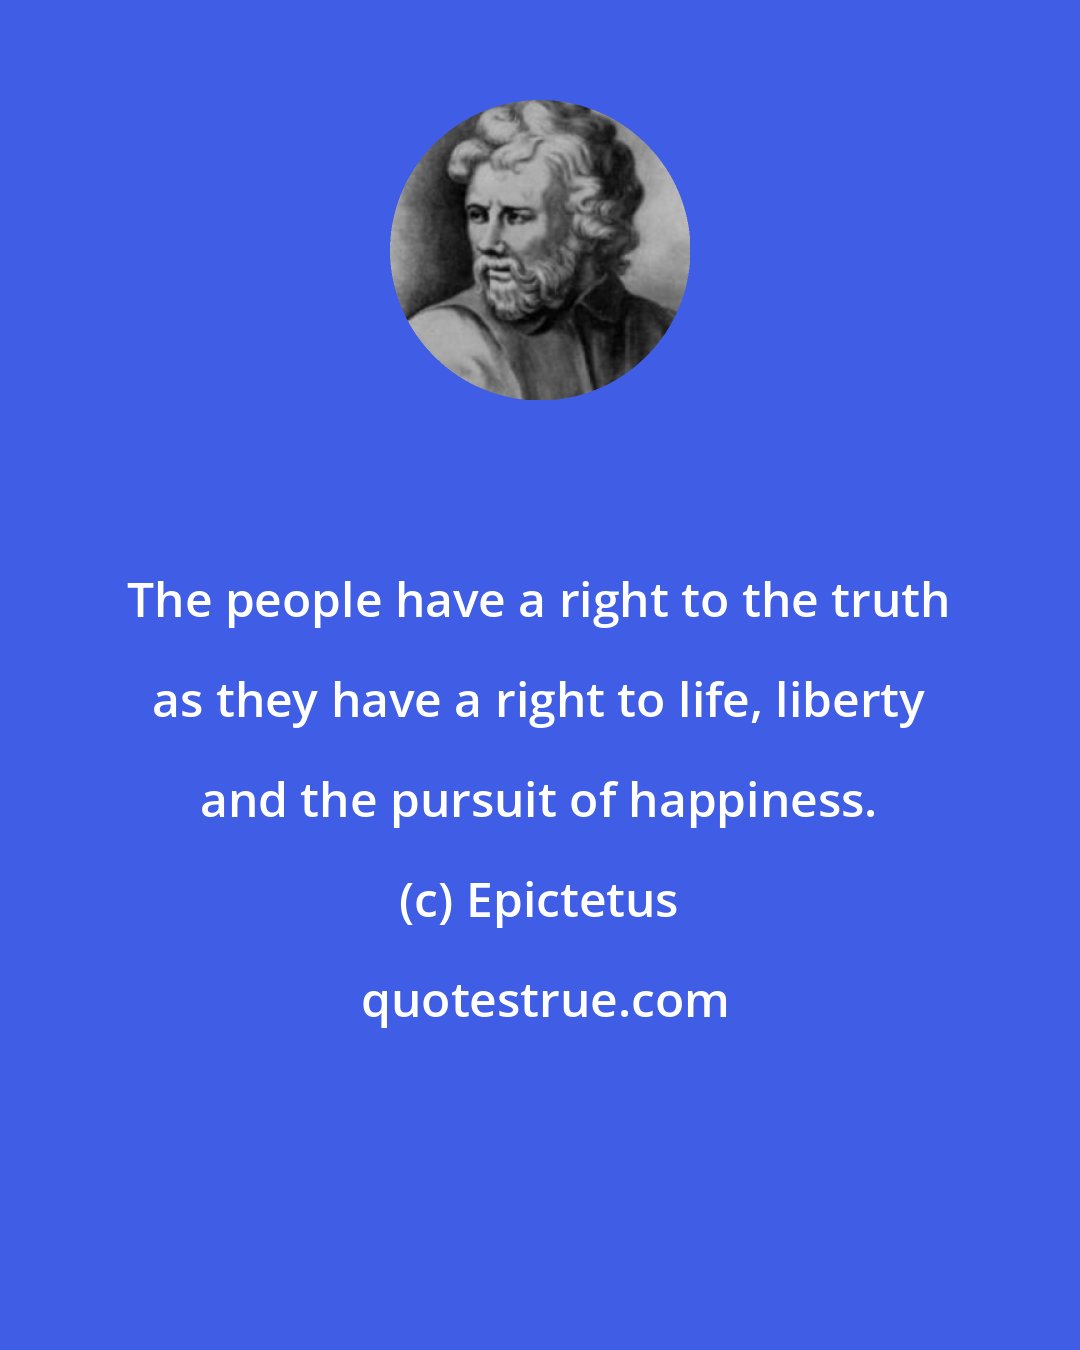 Epictetus: The people have a right to the truth as they have a right to life, liberty and the pursuit of happiness.